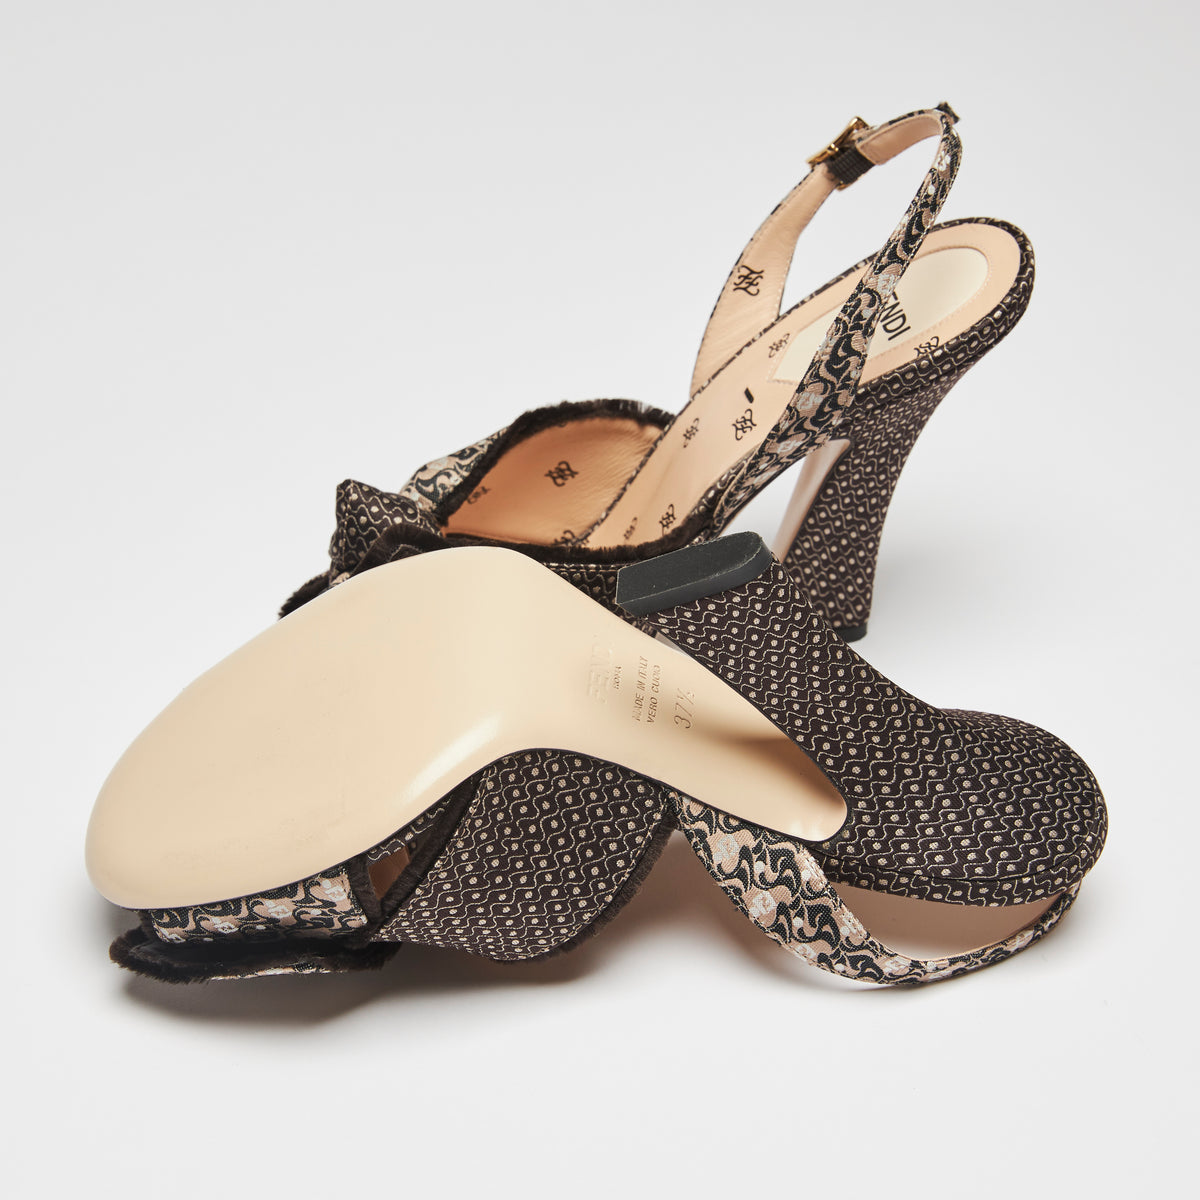 Excellent Pre-Loved Beige and Brown Patterned Fabric Open Toe Sling Back Sandals with Adjustable Ankle Straps(bottom)